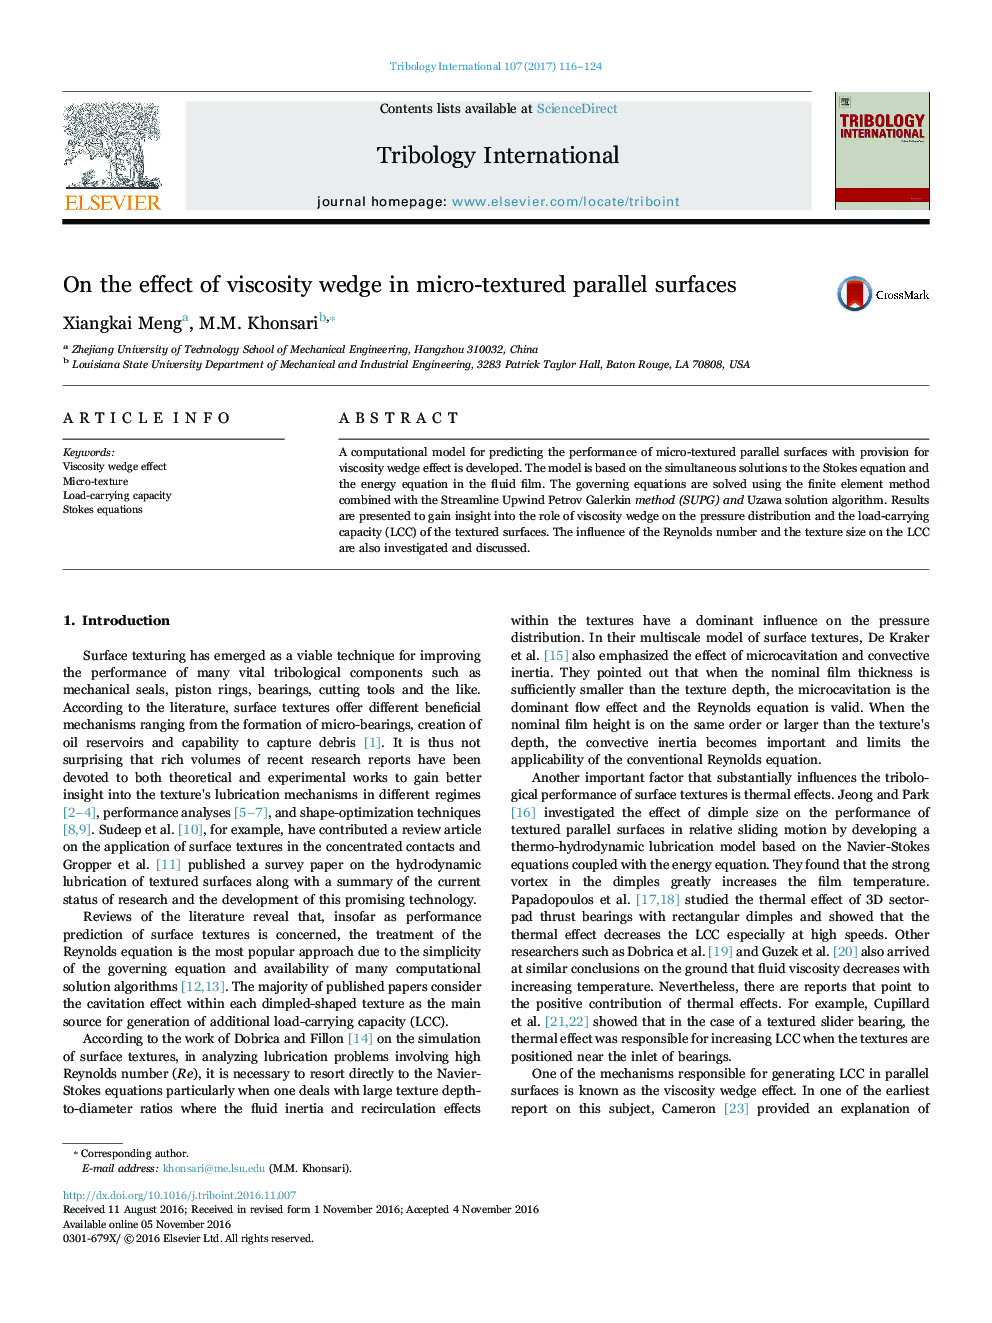 On the effect of viscosity wedge in micro-textured parallel surfaces